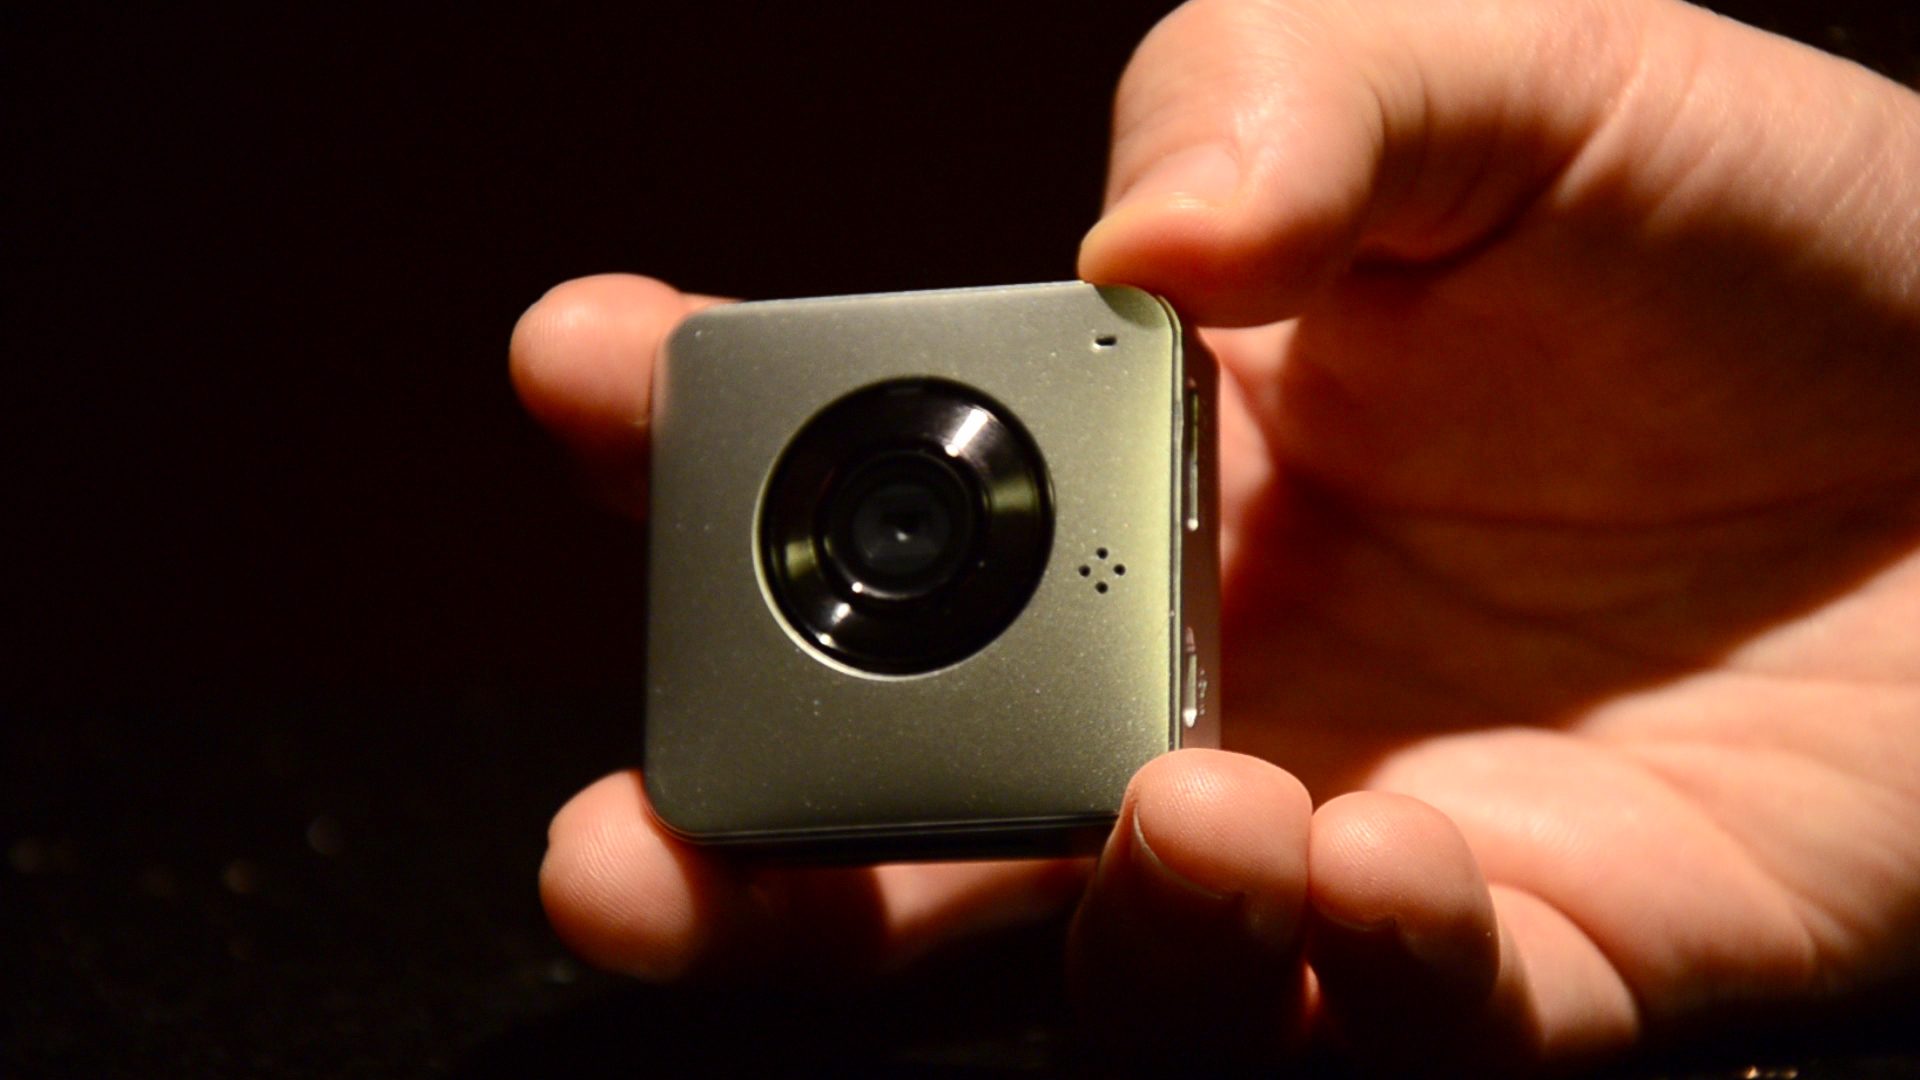 World's First Tiny Wearable HD Video Logging Camera